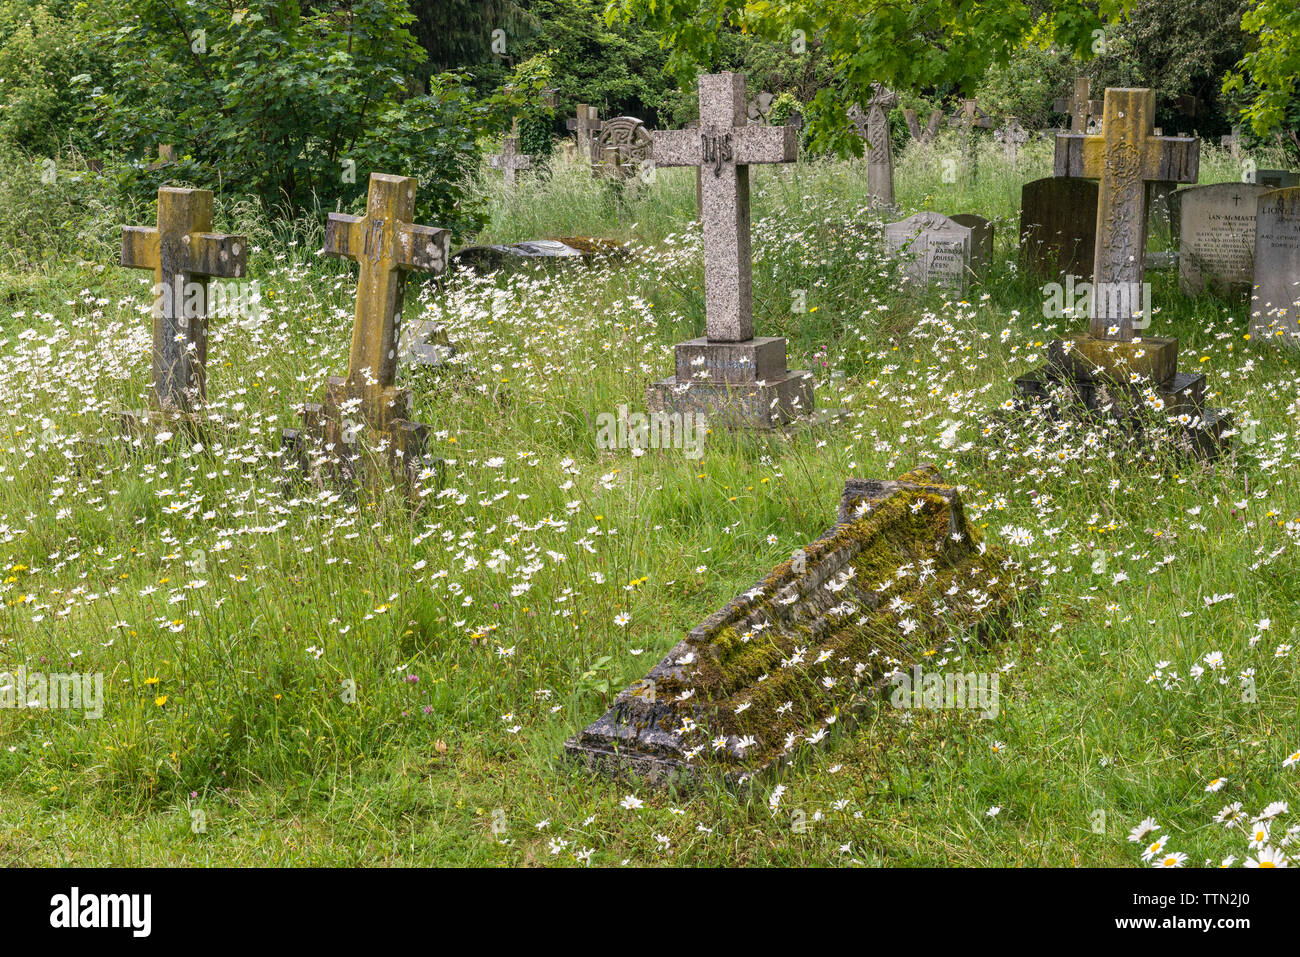 Holywell Cemetery, Oxford, UK. Closed to new burials for many years, it is now run as a wildlife refuge, with only a few paths kept clear Stock Photo